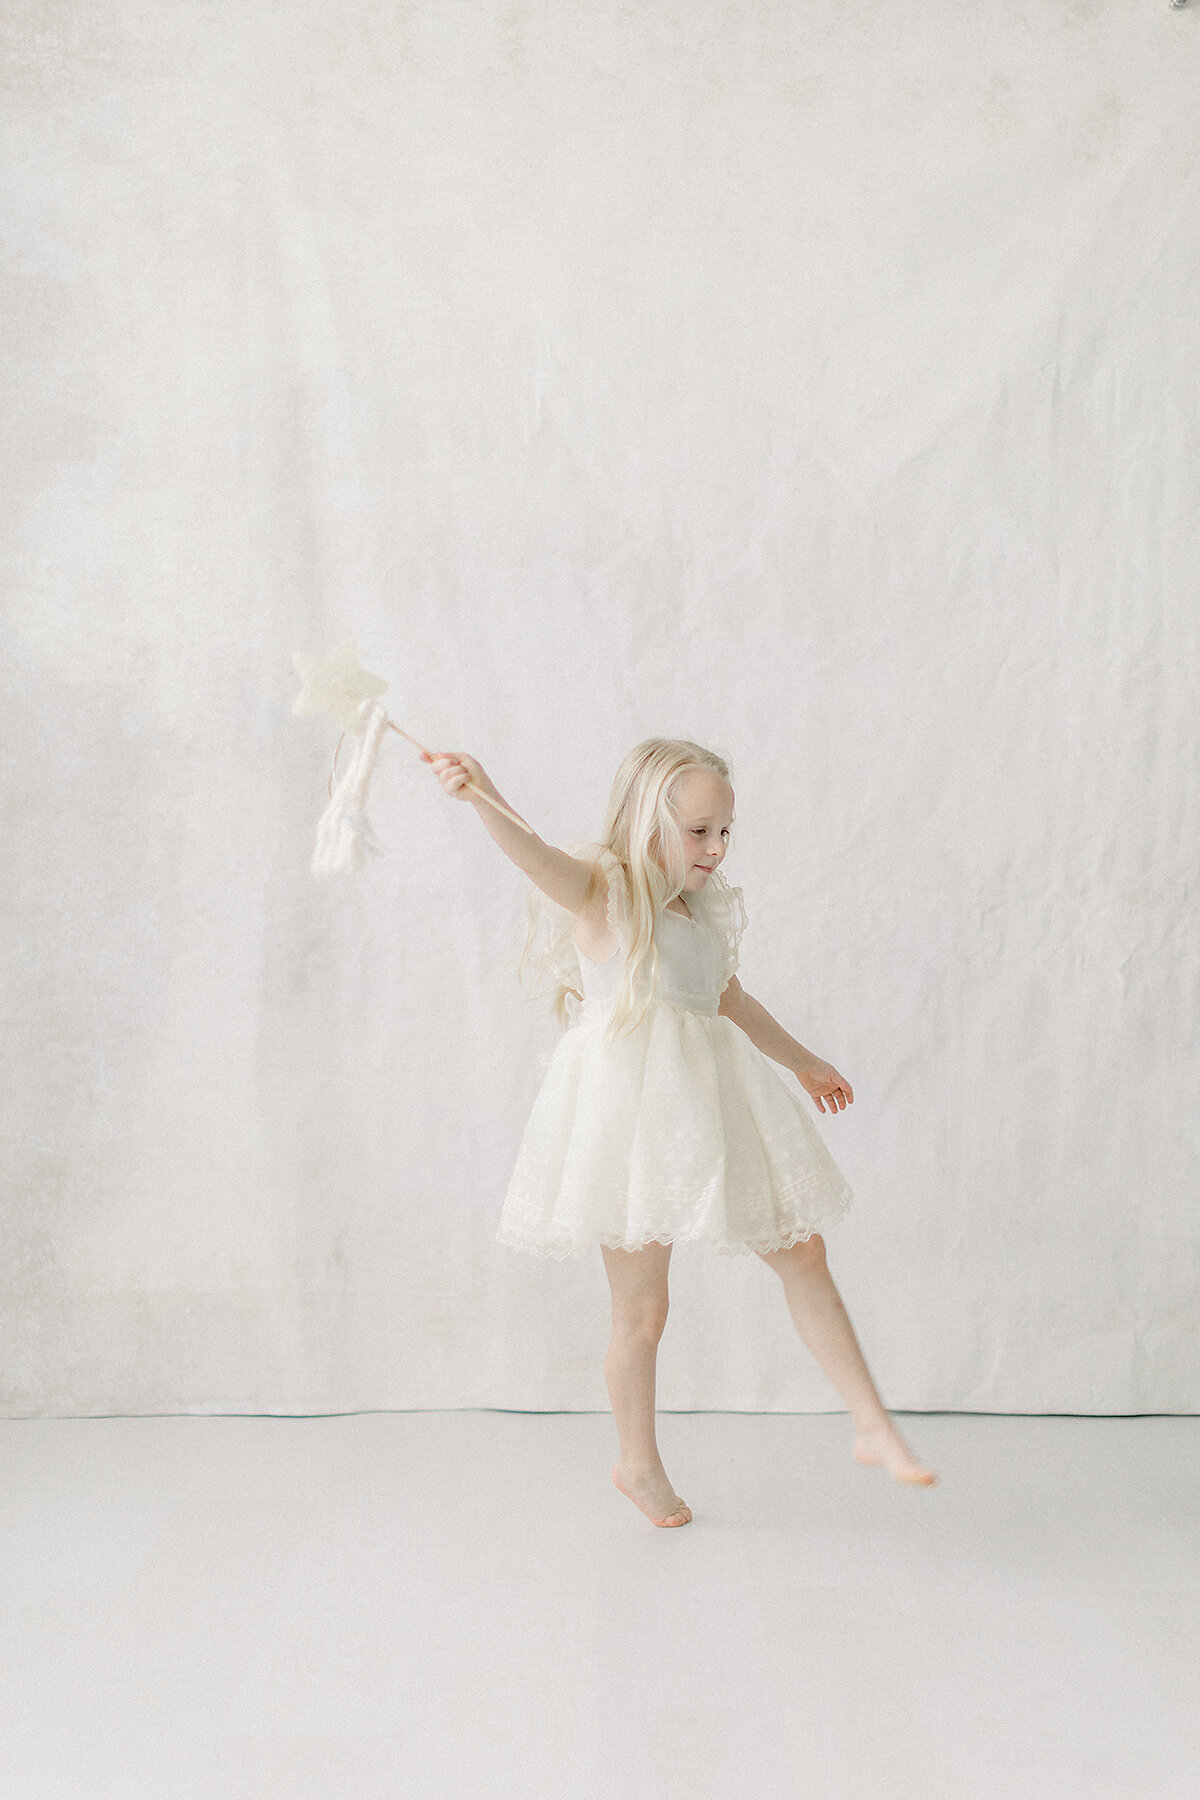 A beautiful ligth filled portrait of a girl dressed in a cream birthday dress dancing around a photography studio in Dallas holding a star wand with ribbon draping down from it.